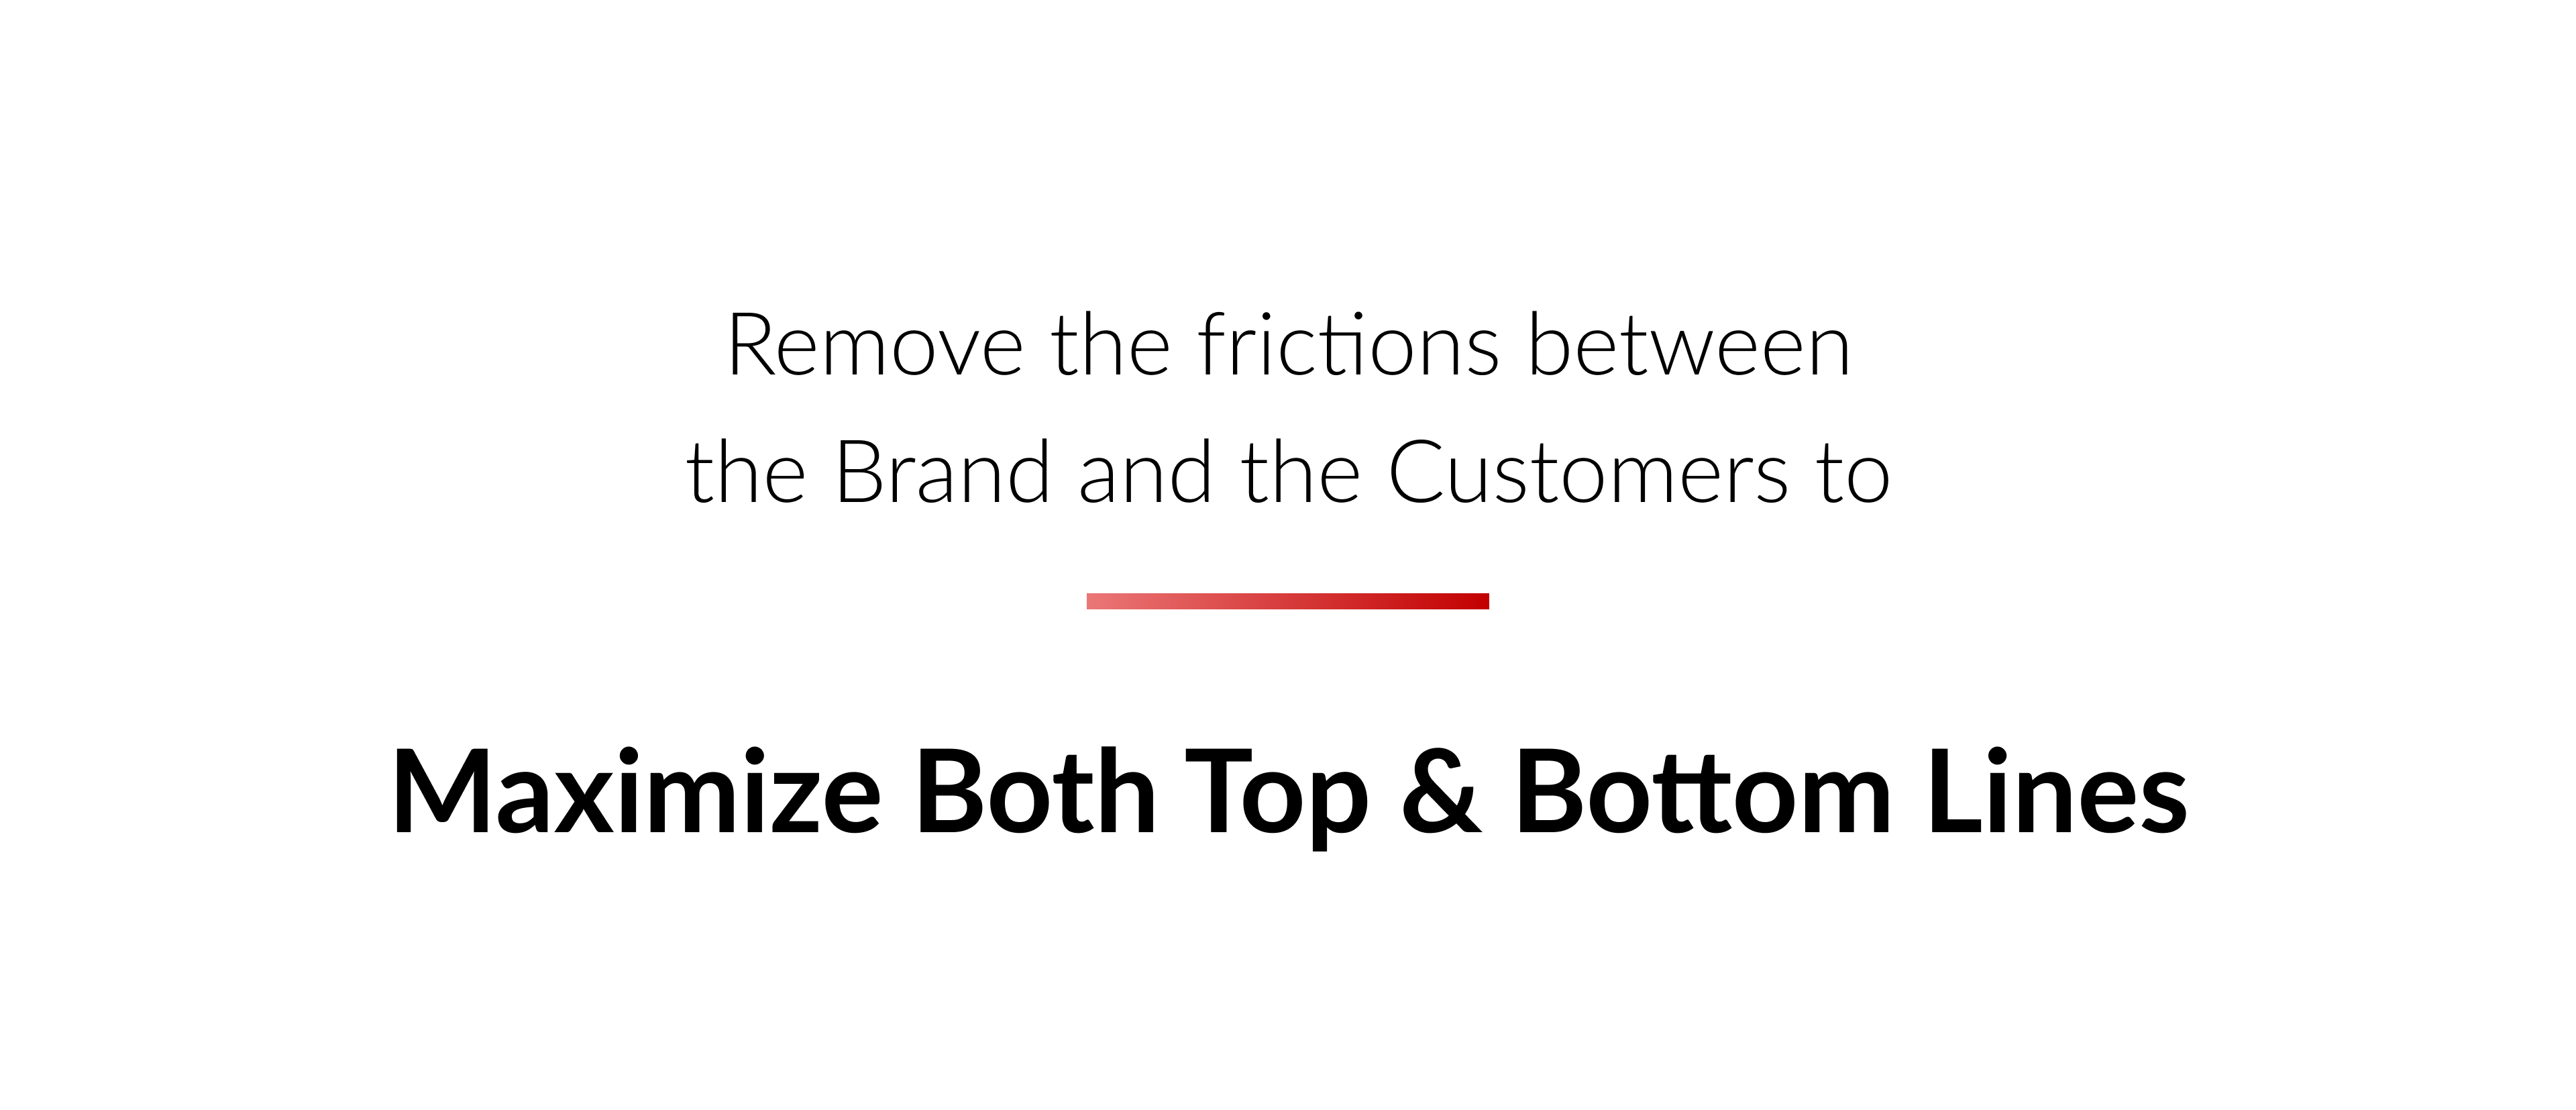 Remove the frictions between the brand and customers to maximize both top and bottom lines